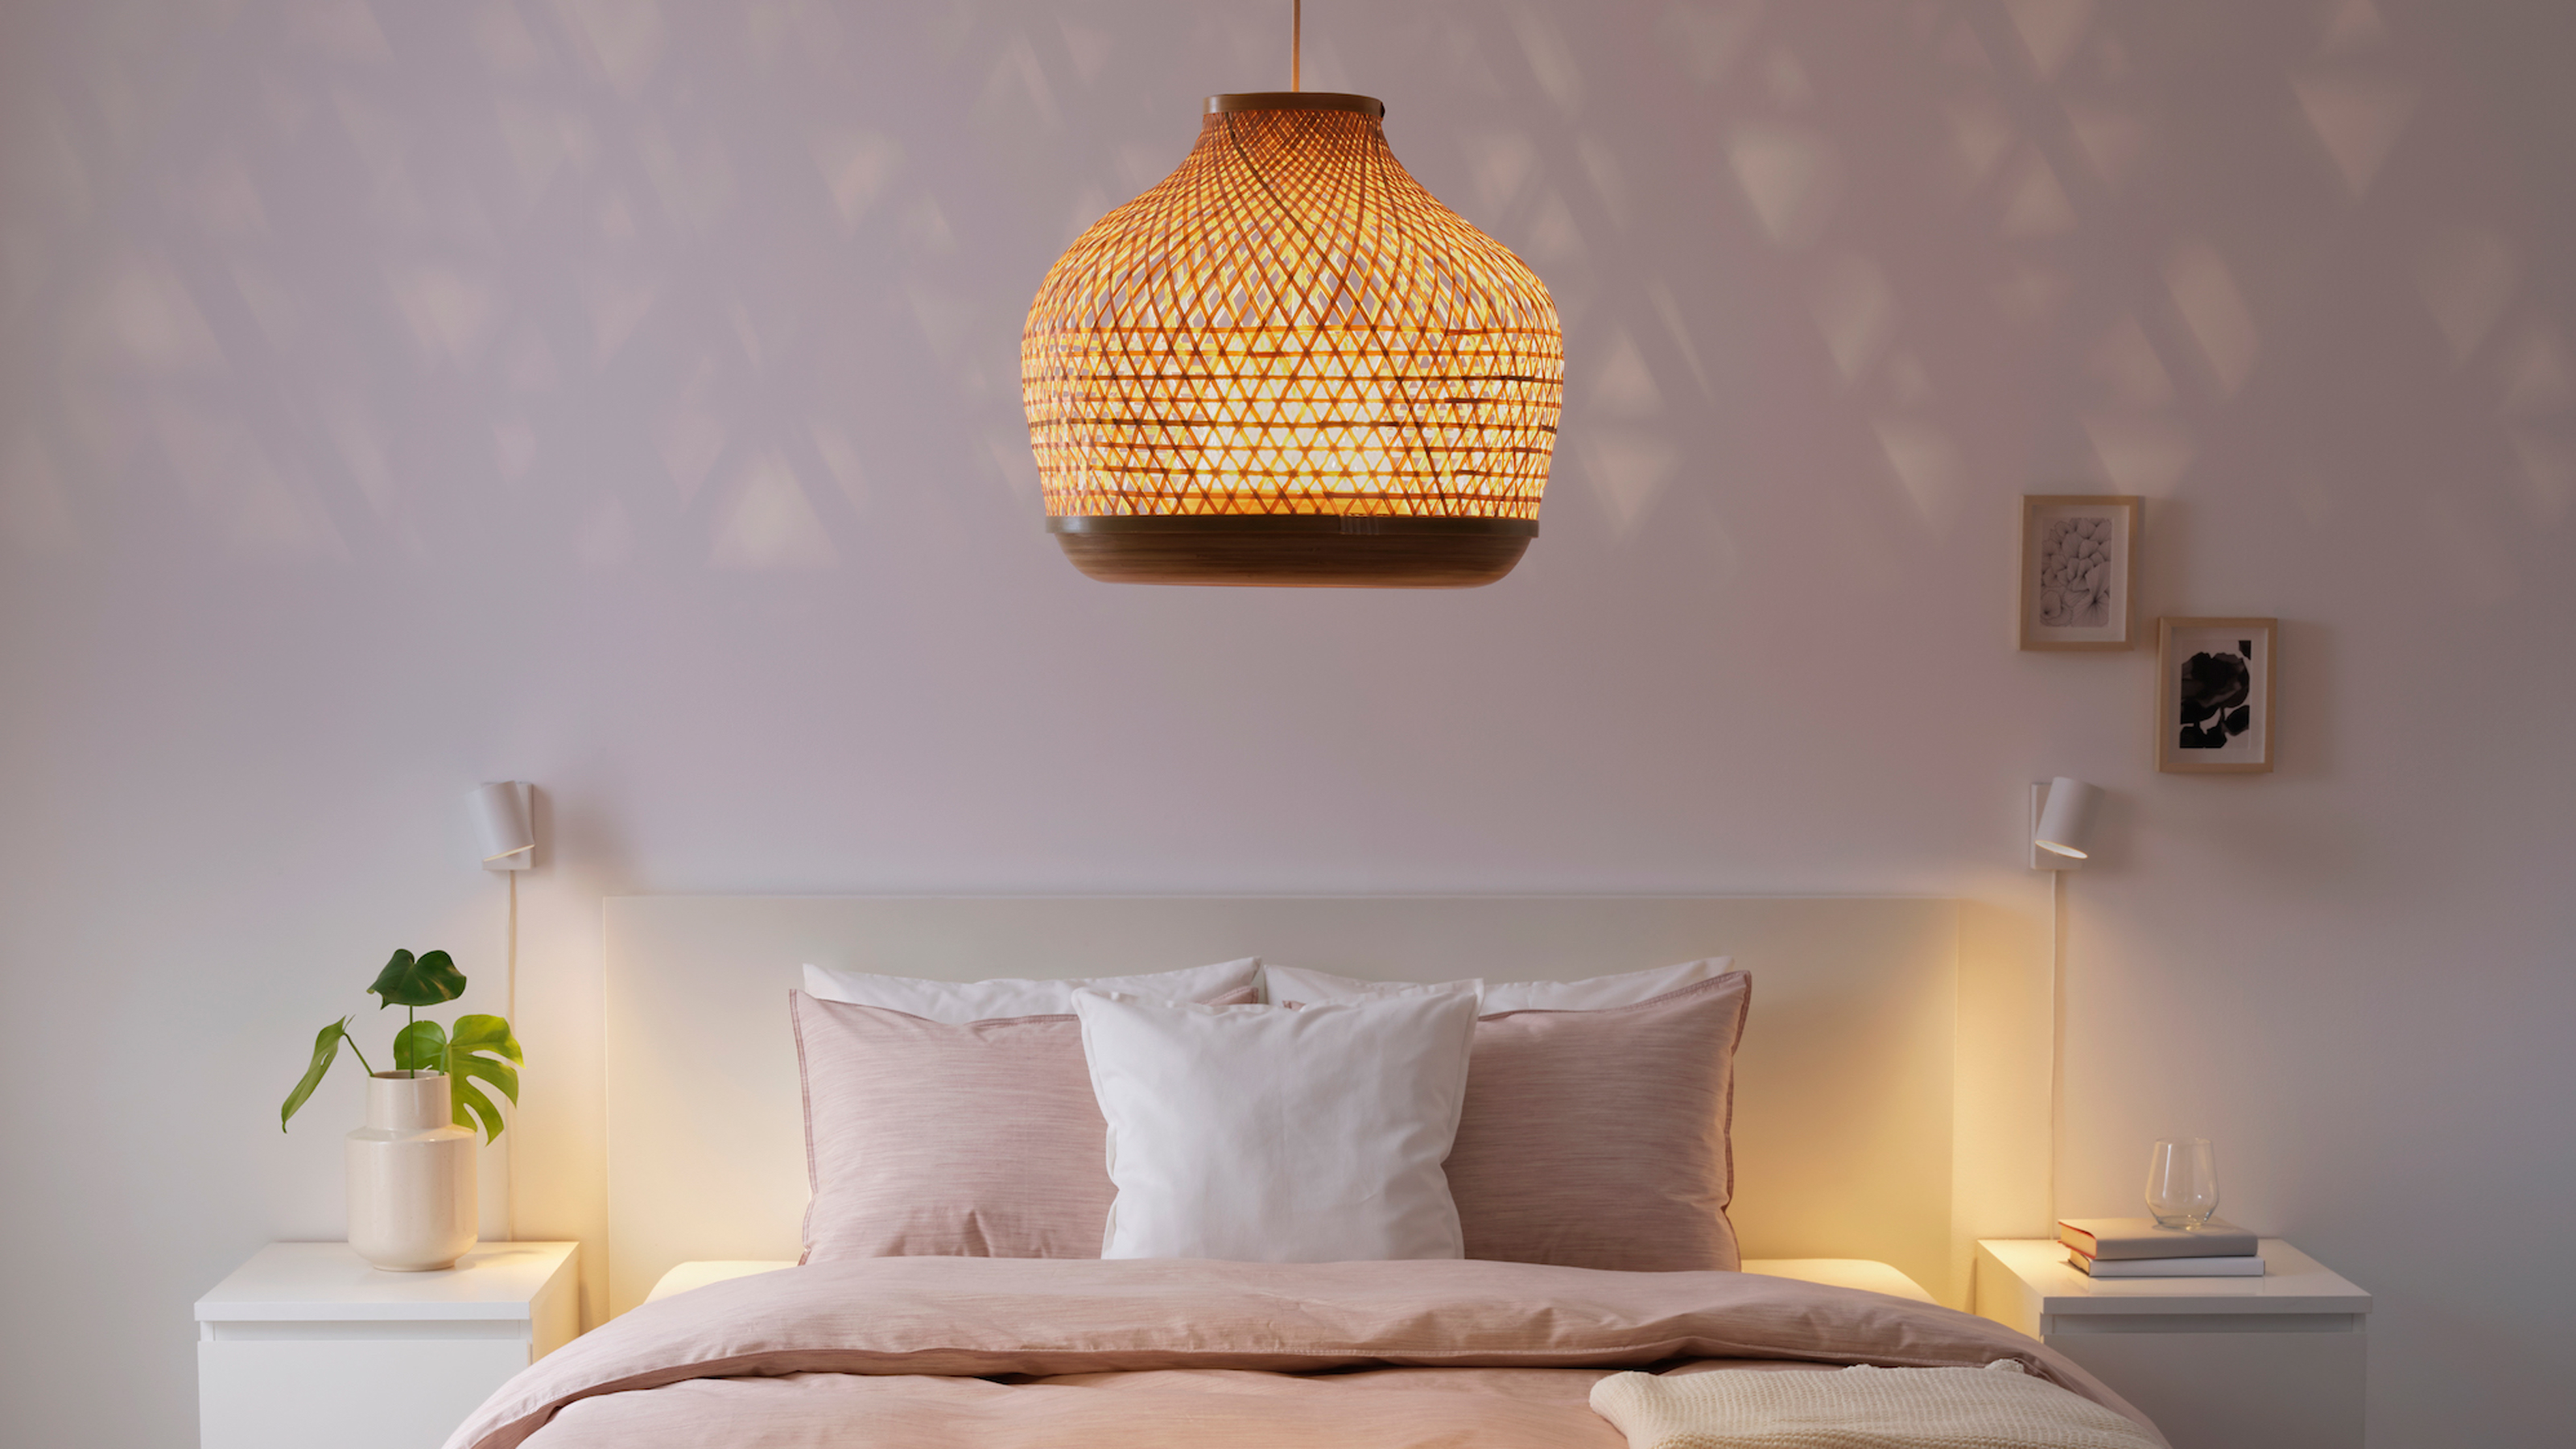 bedroom ceiling light ideas – 11 looks to spark inspiration | real